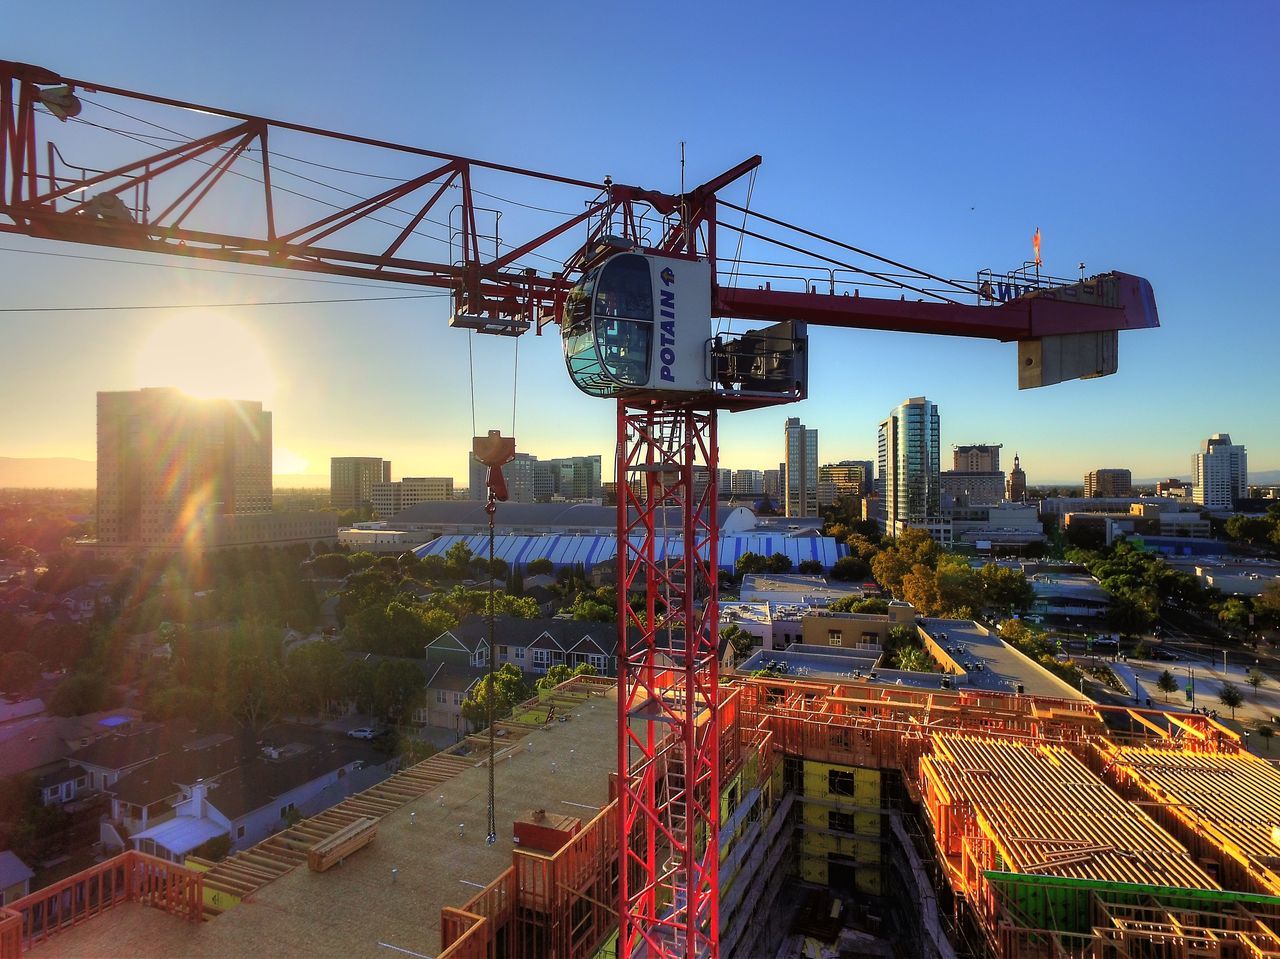 built structure, architecture, construction site, clear sky, building exterior, development, crane - construction machinery, crane, city, industry, sunlight, construction, metal, sunset, construction industry, tall - high, sky, copy space, outdoors, incomplete